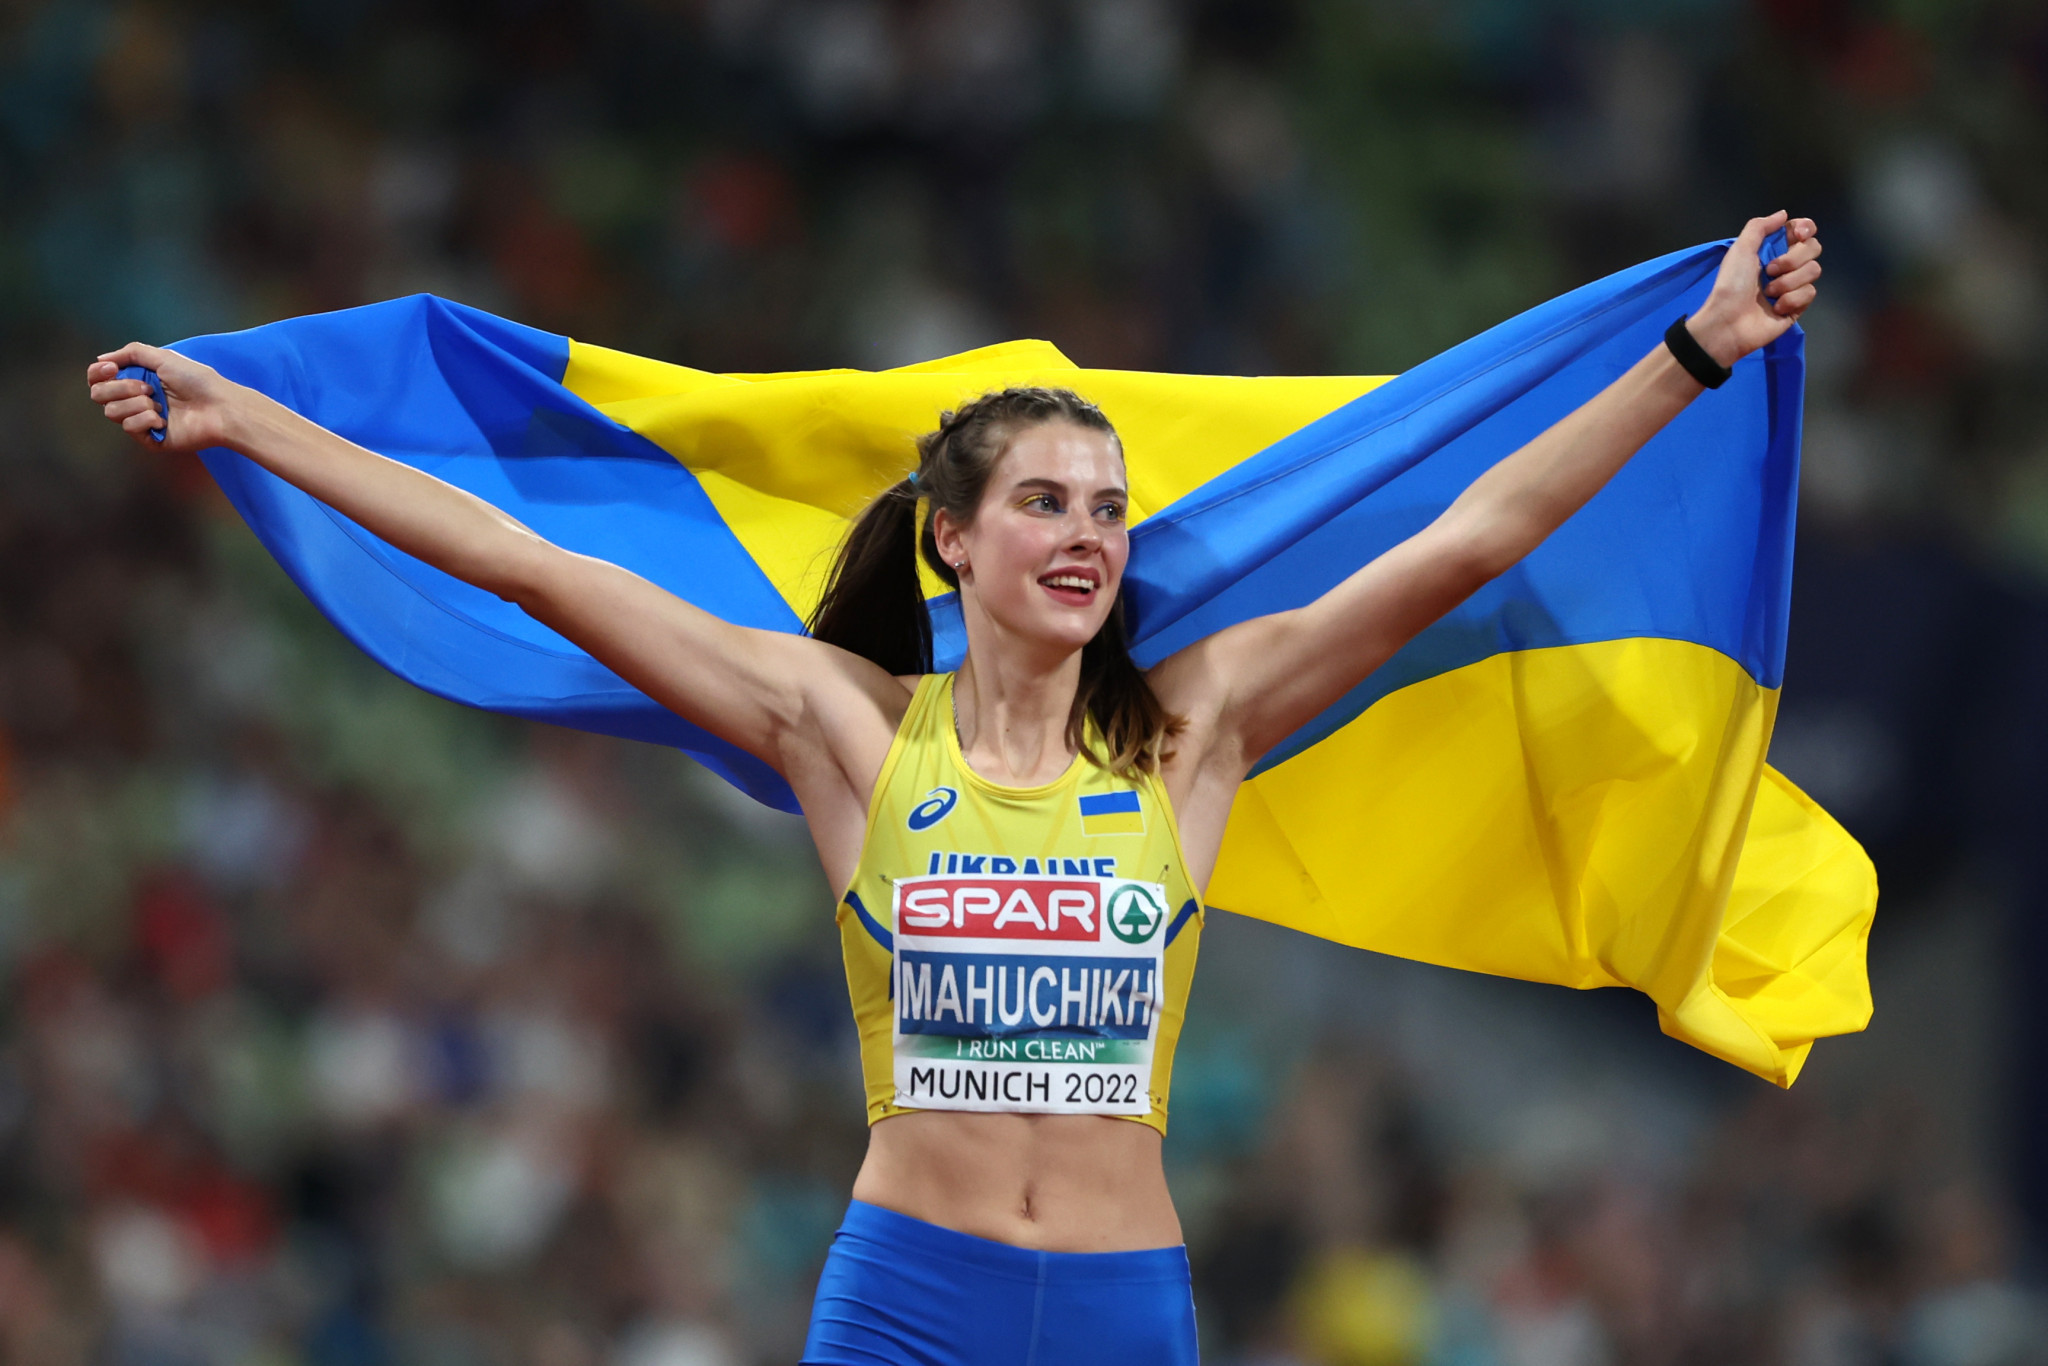 Yaroslava Mahuchikh of Ukraine claimed women's high jump gold on countback at the European Championships ©Getty Images